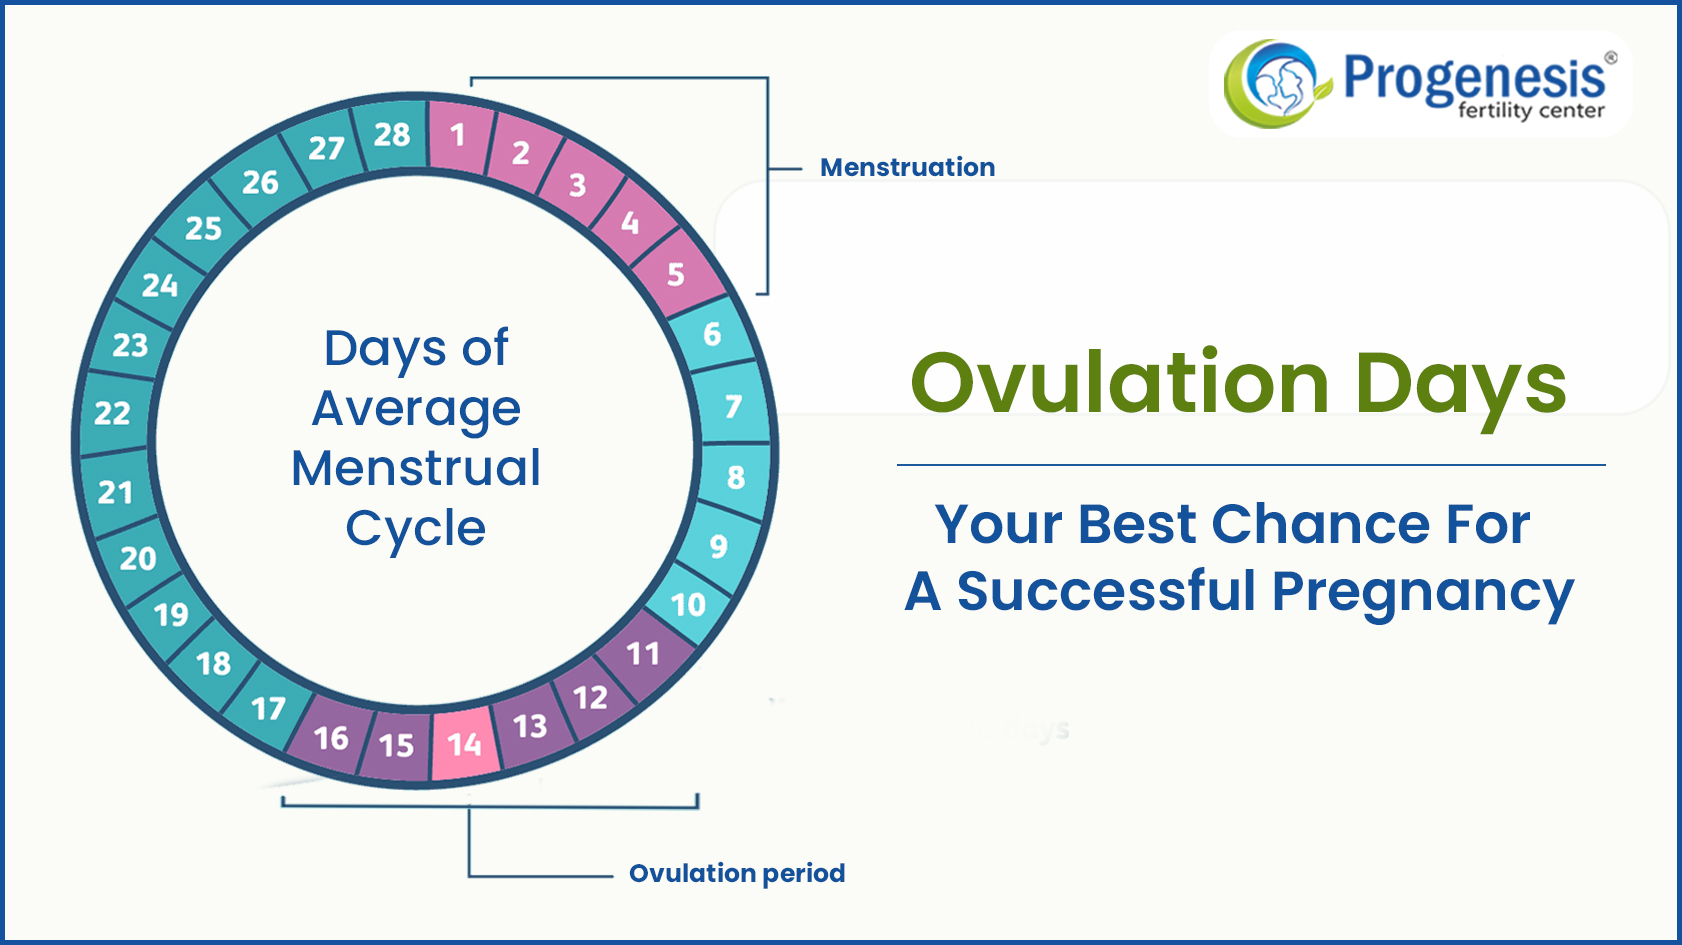 Ovulation Days - Your Best Chance For A Successful Pregnancy